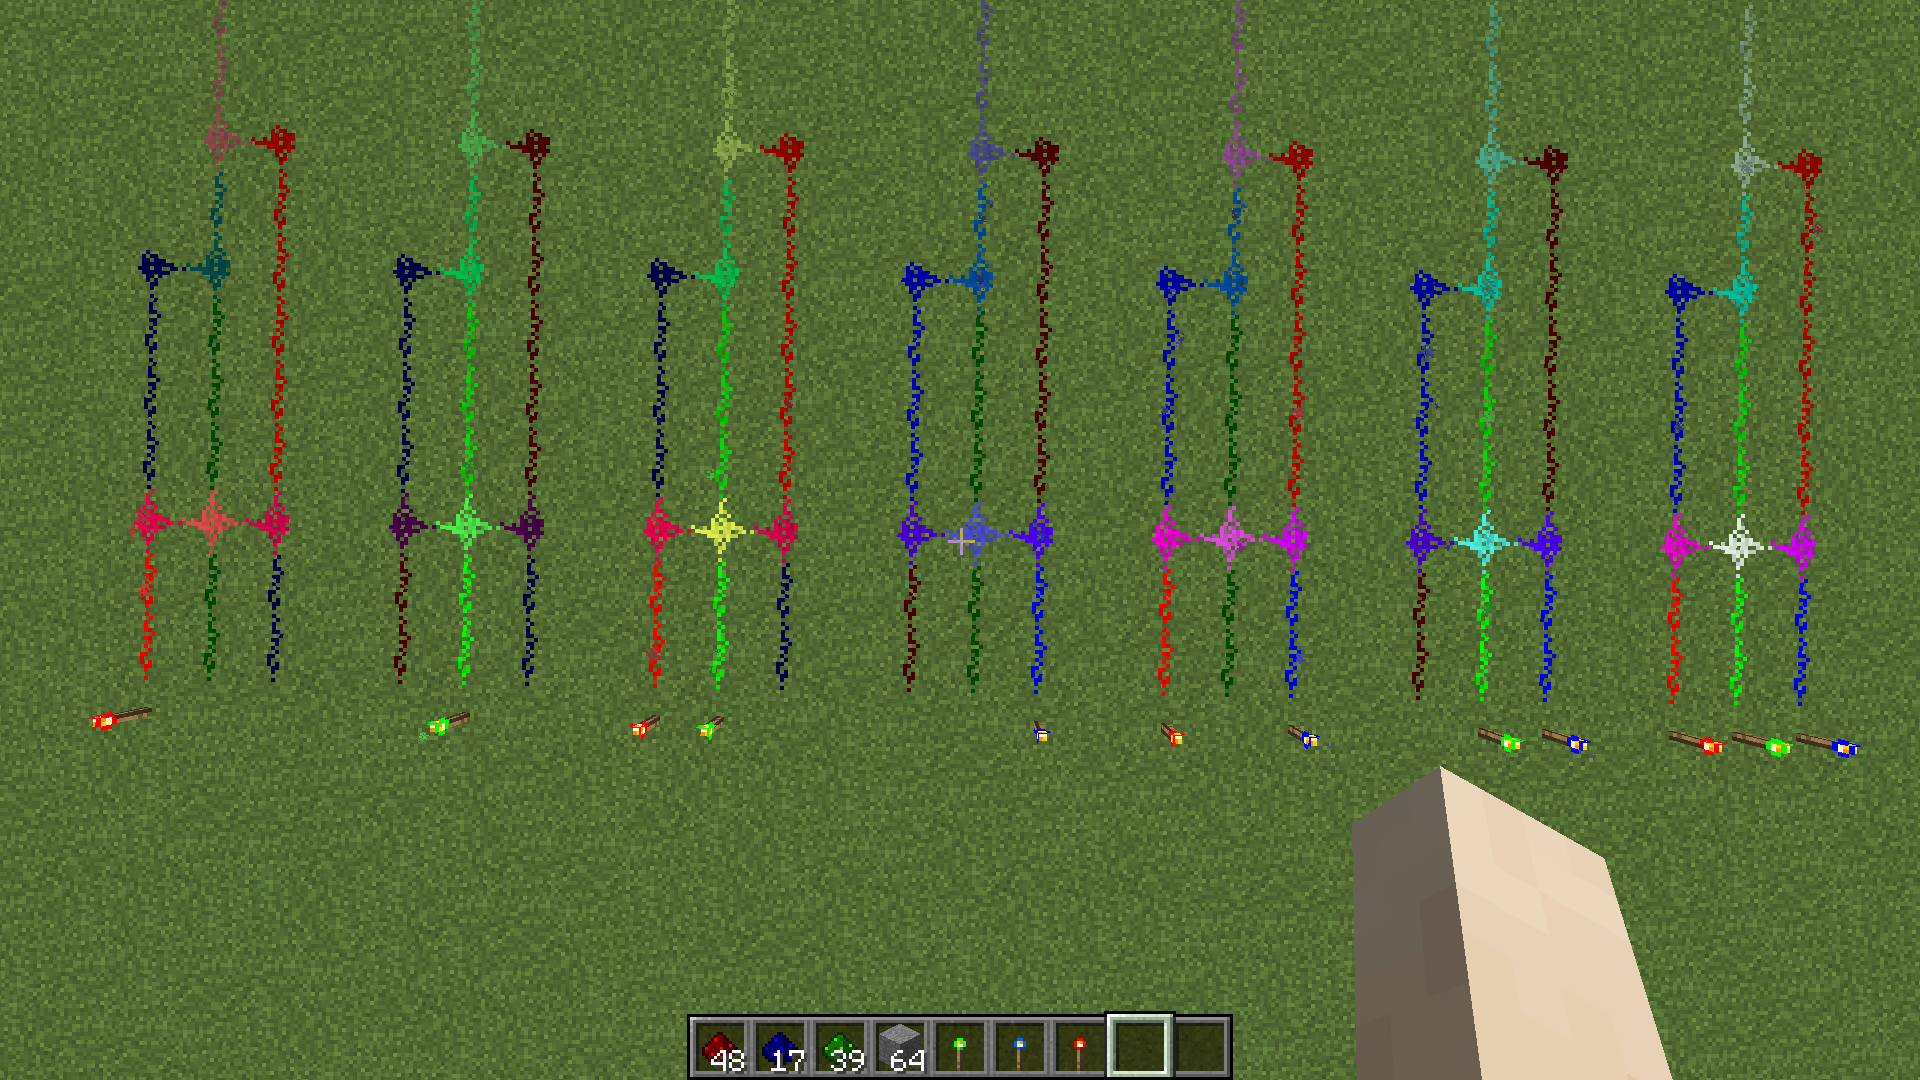  Example of all three types of Redstone operated differently by torches